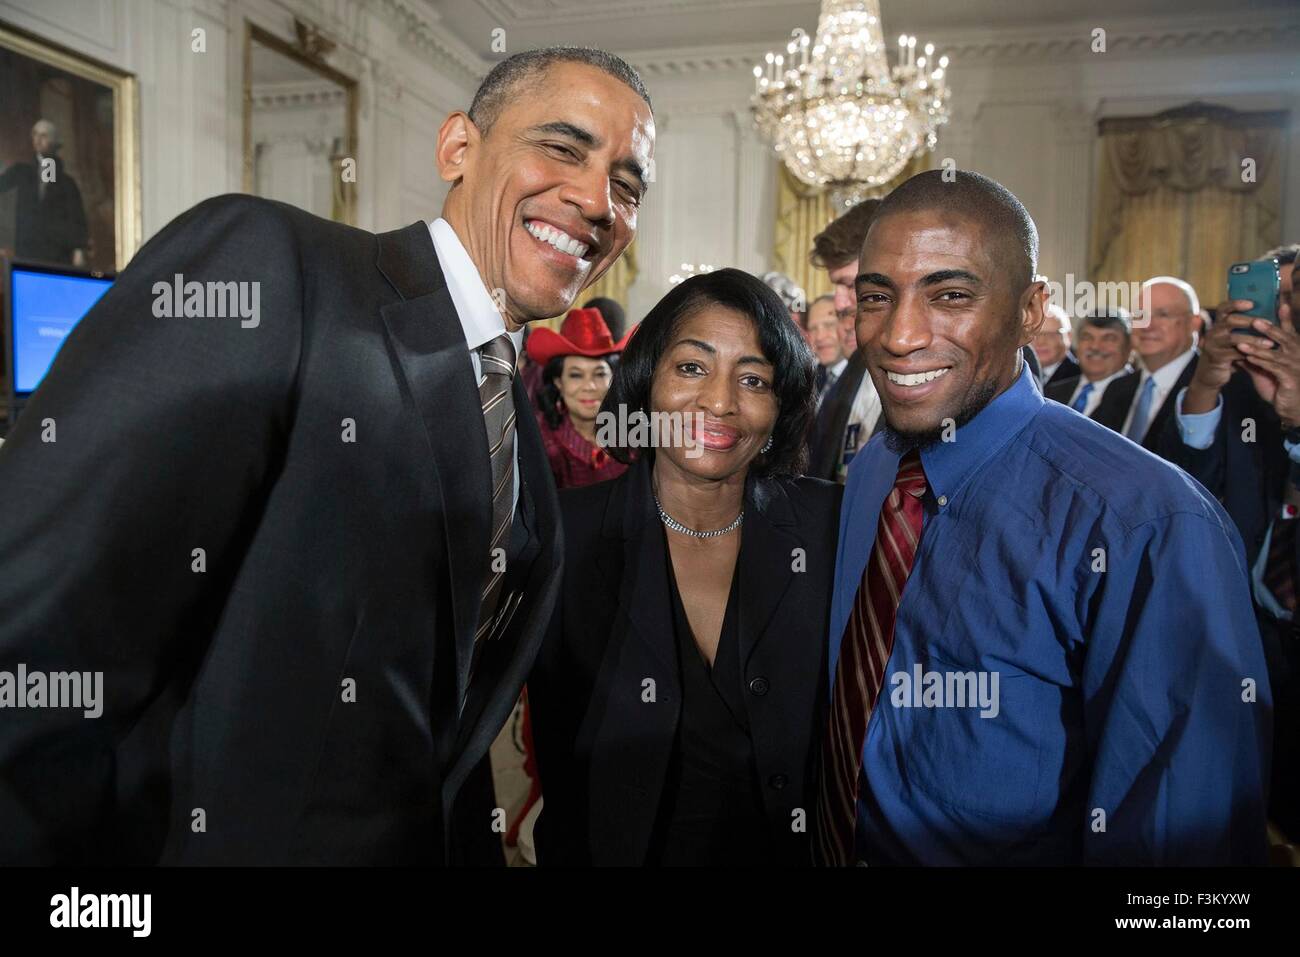 Washington DC, USA. 7th October, 2015. U.S. President Barack Obama joins Terrence Wise of Fight for $15, and his mother Joann for a selfie following the White House Summit on Worker Voice in the East Room October 7, 2015 in Washington, DC. Stock Photo